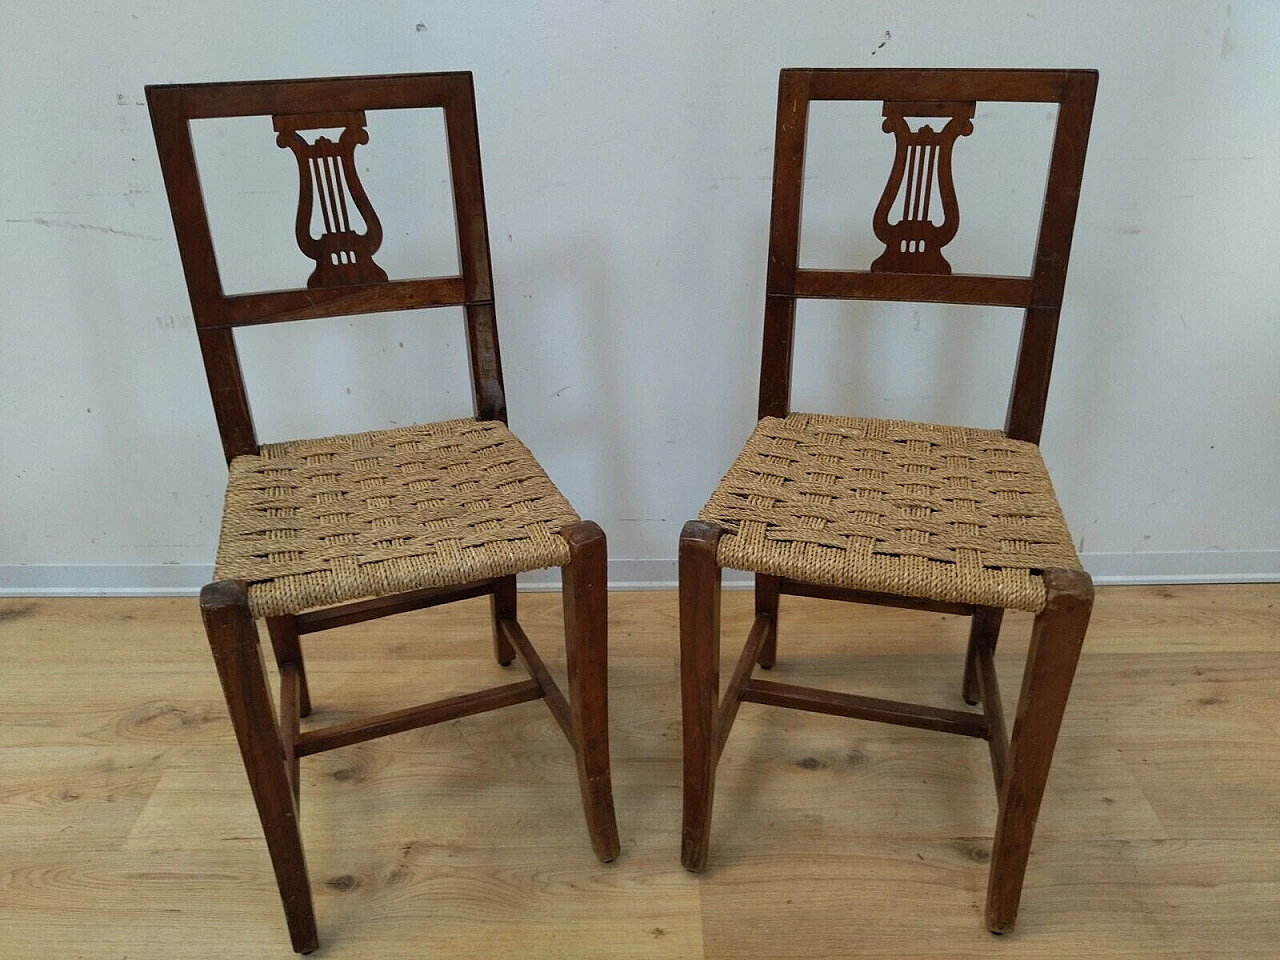 Pair of Empire solid walnut and straw chairs, early 19th century 1